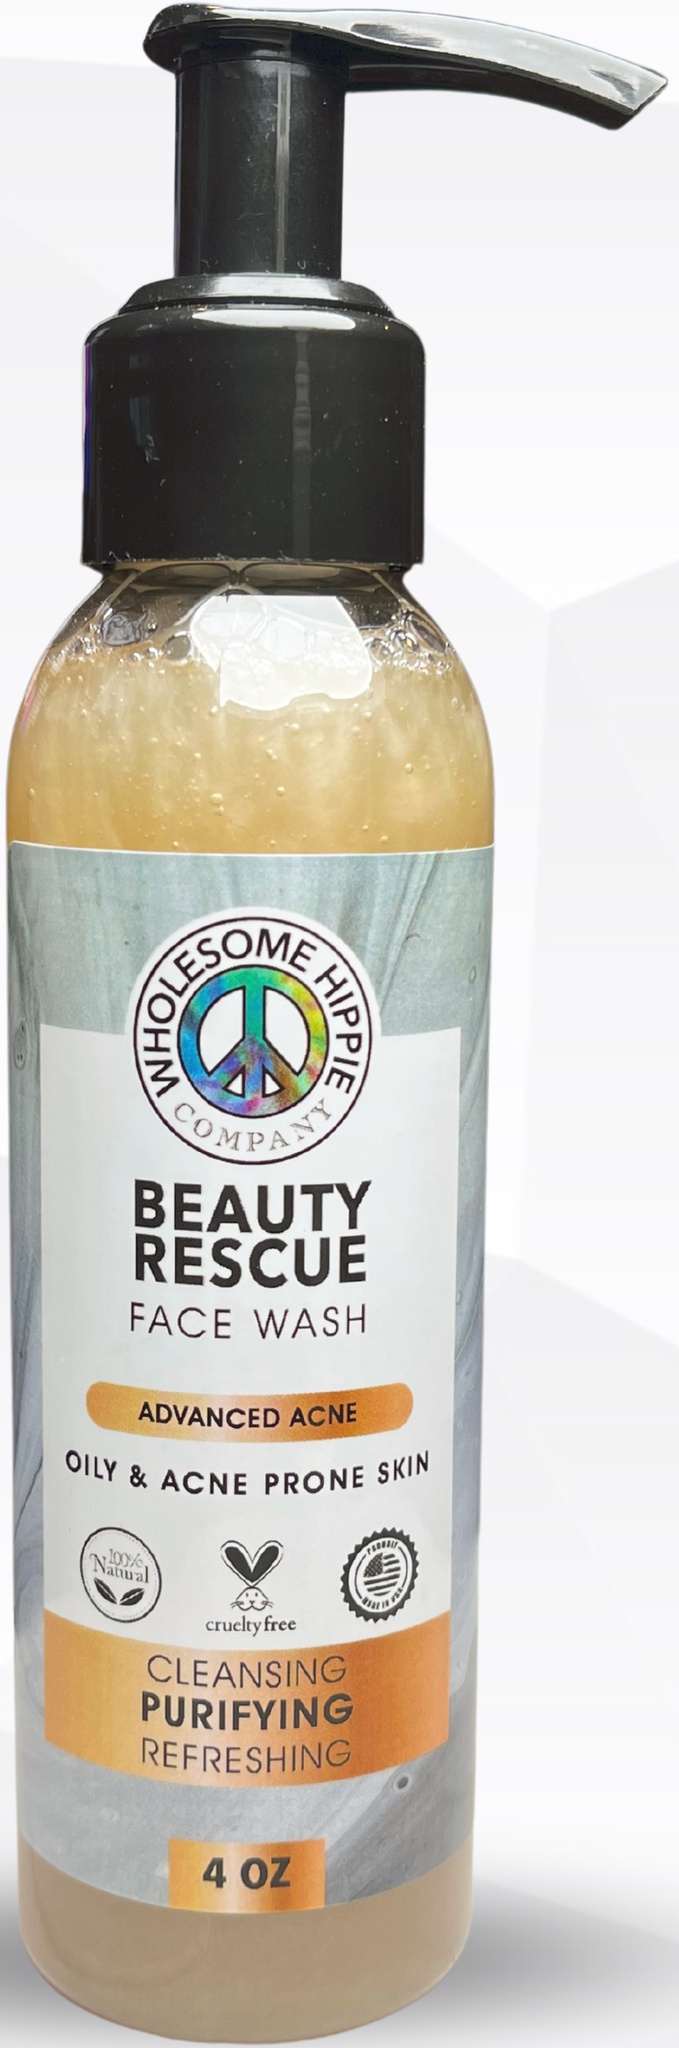 Wholesome Hippie Naturals Advanced Acne Provitamin Face Wash With Msm